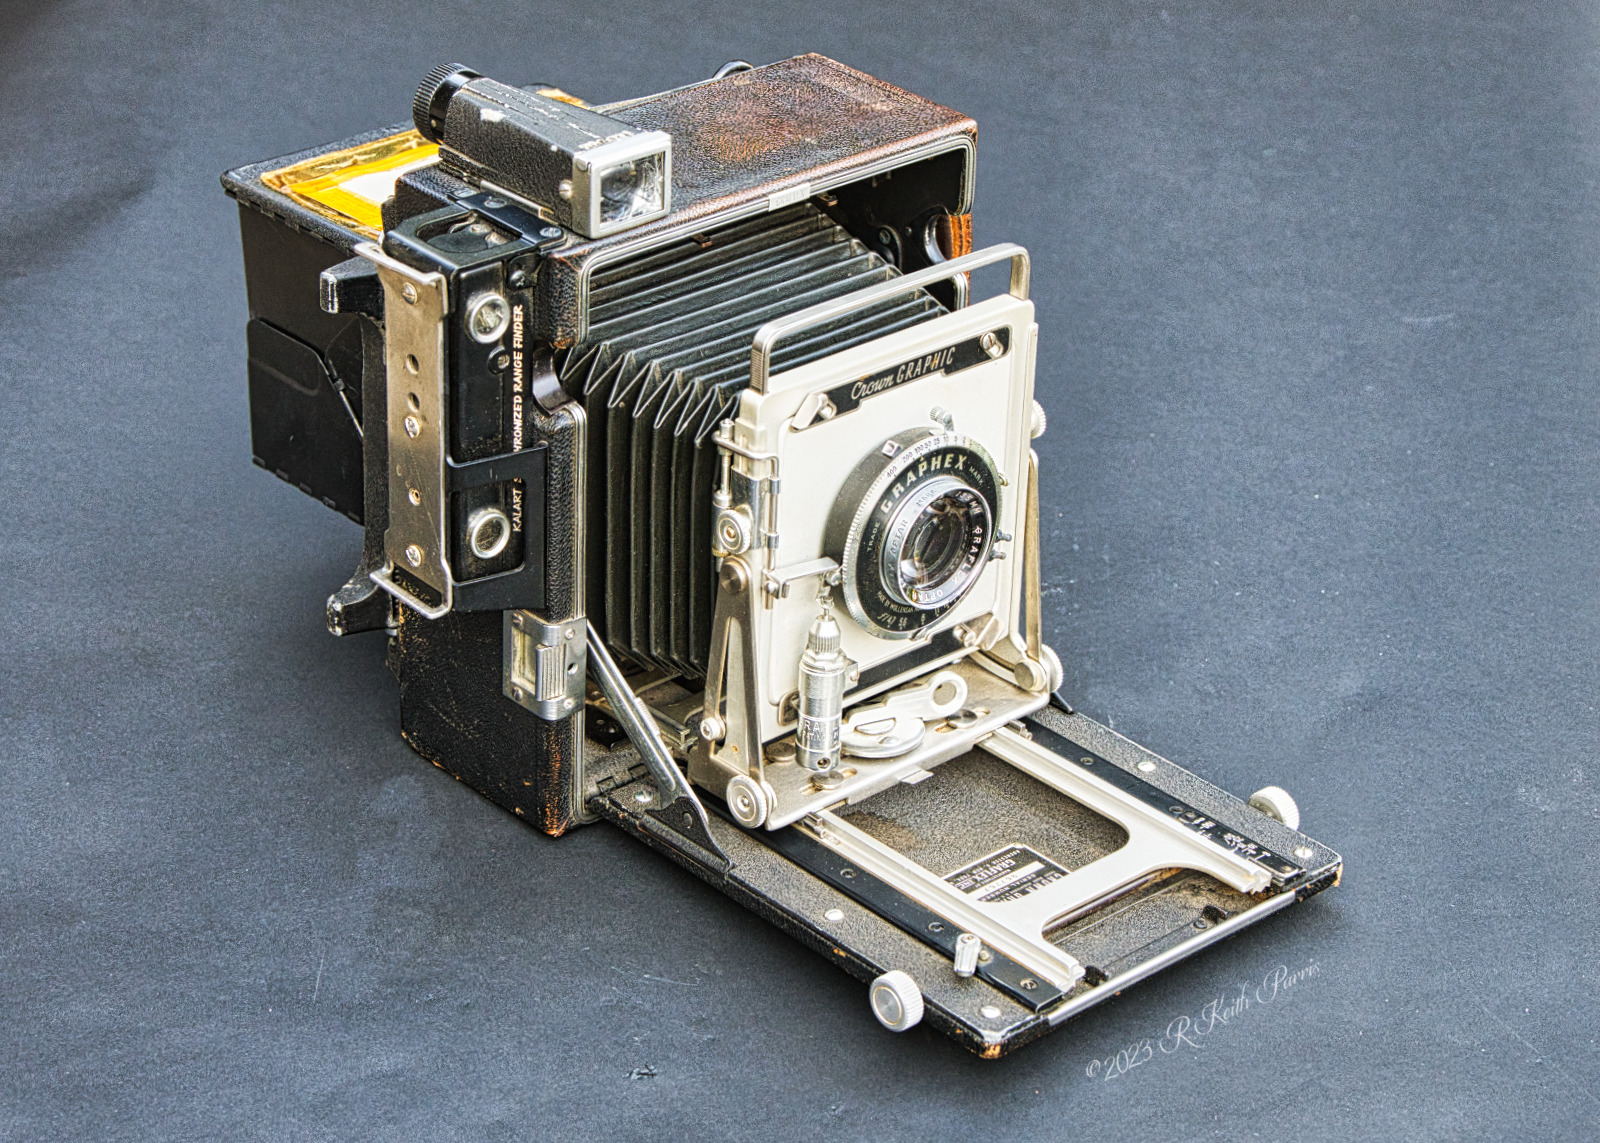  GRAFLEX Crown Graphic Camera by Keith Parris